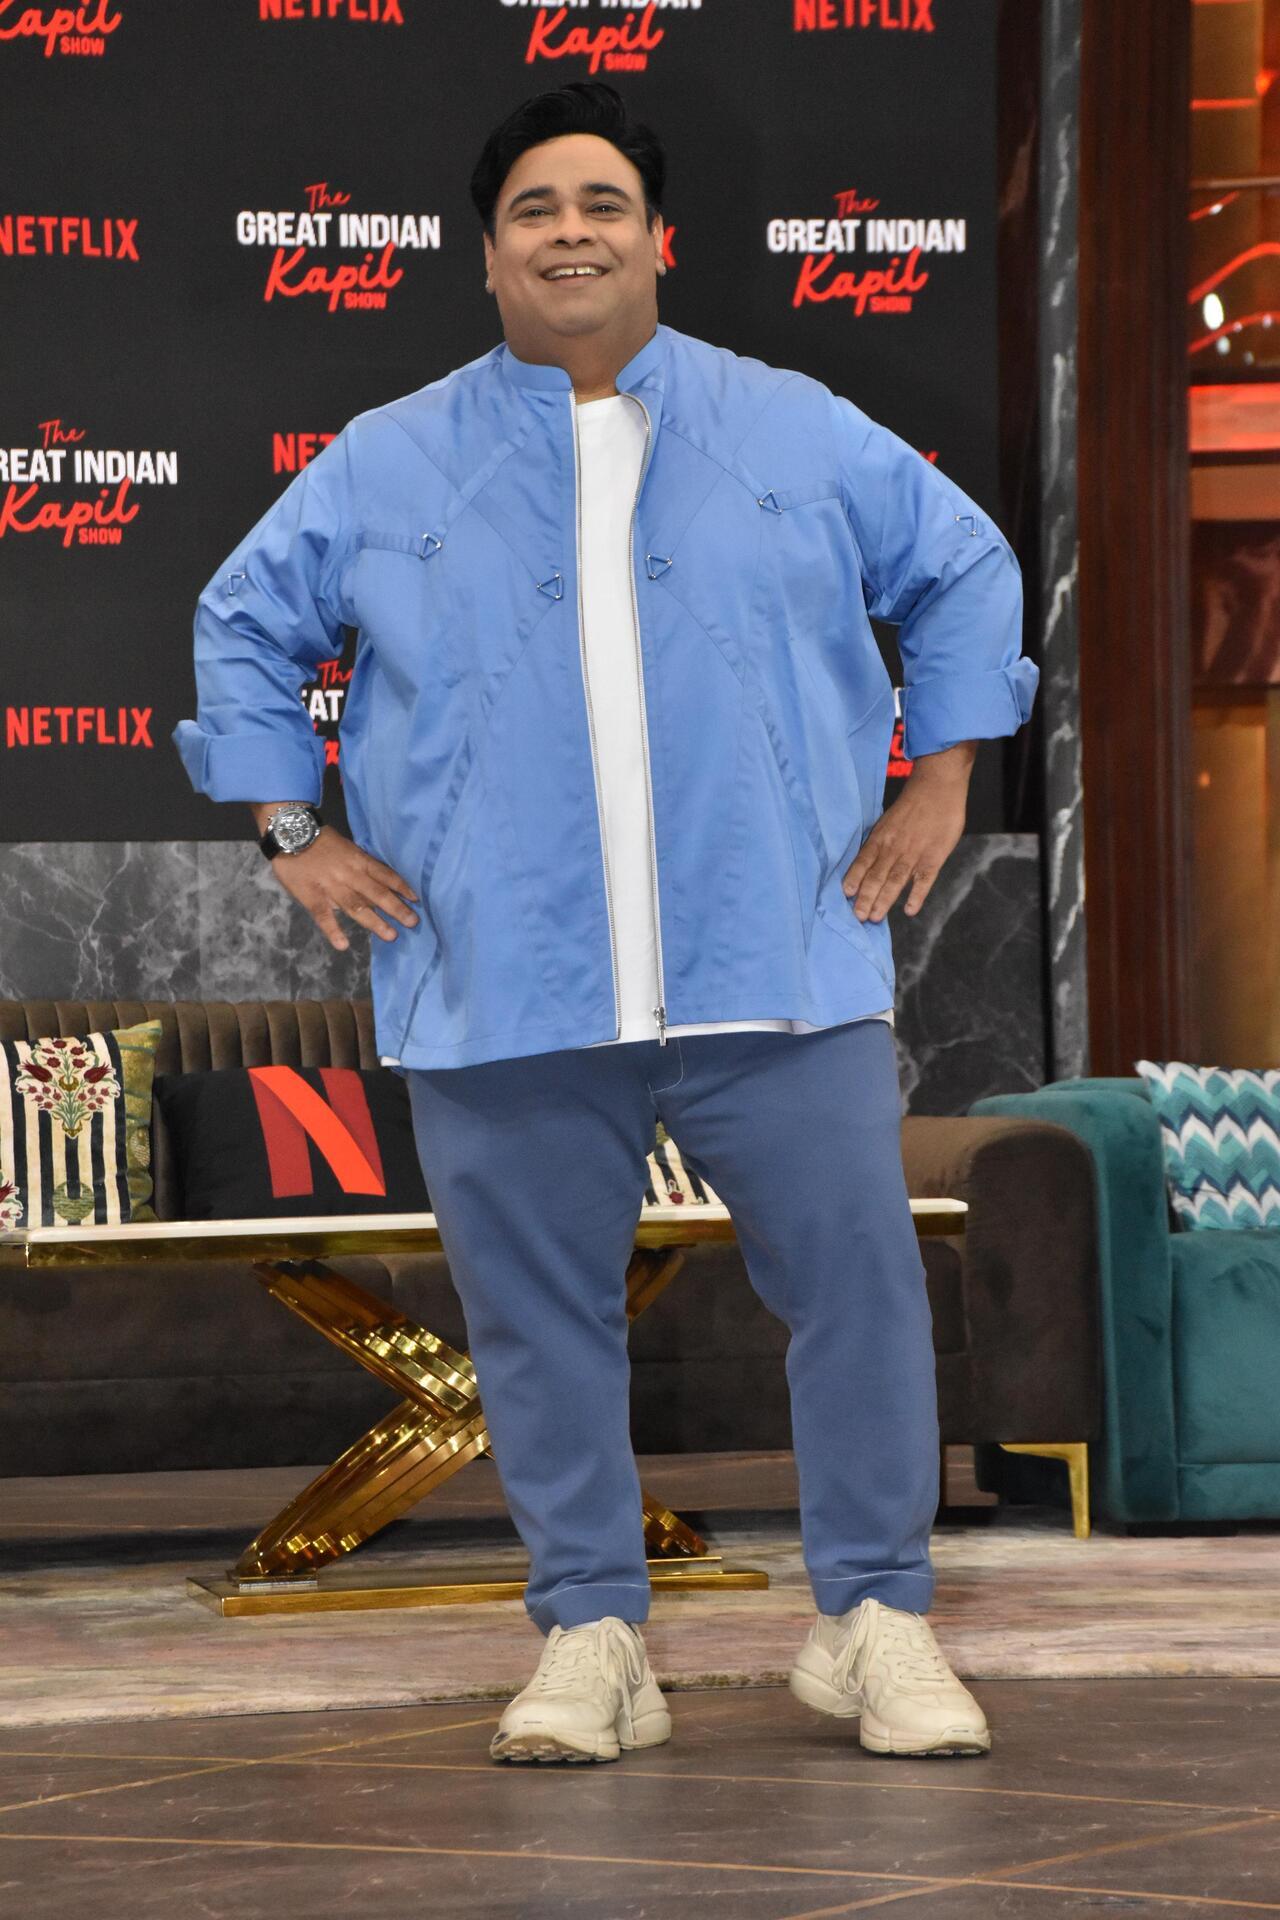 Kiku Sharda shines bright in this blue outfit at the press conference